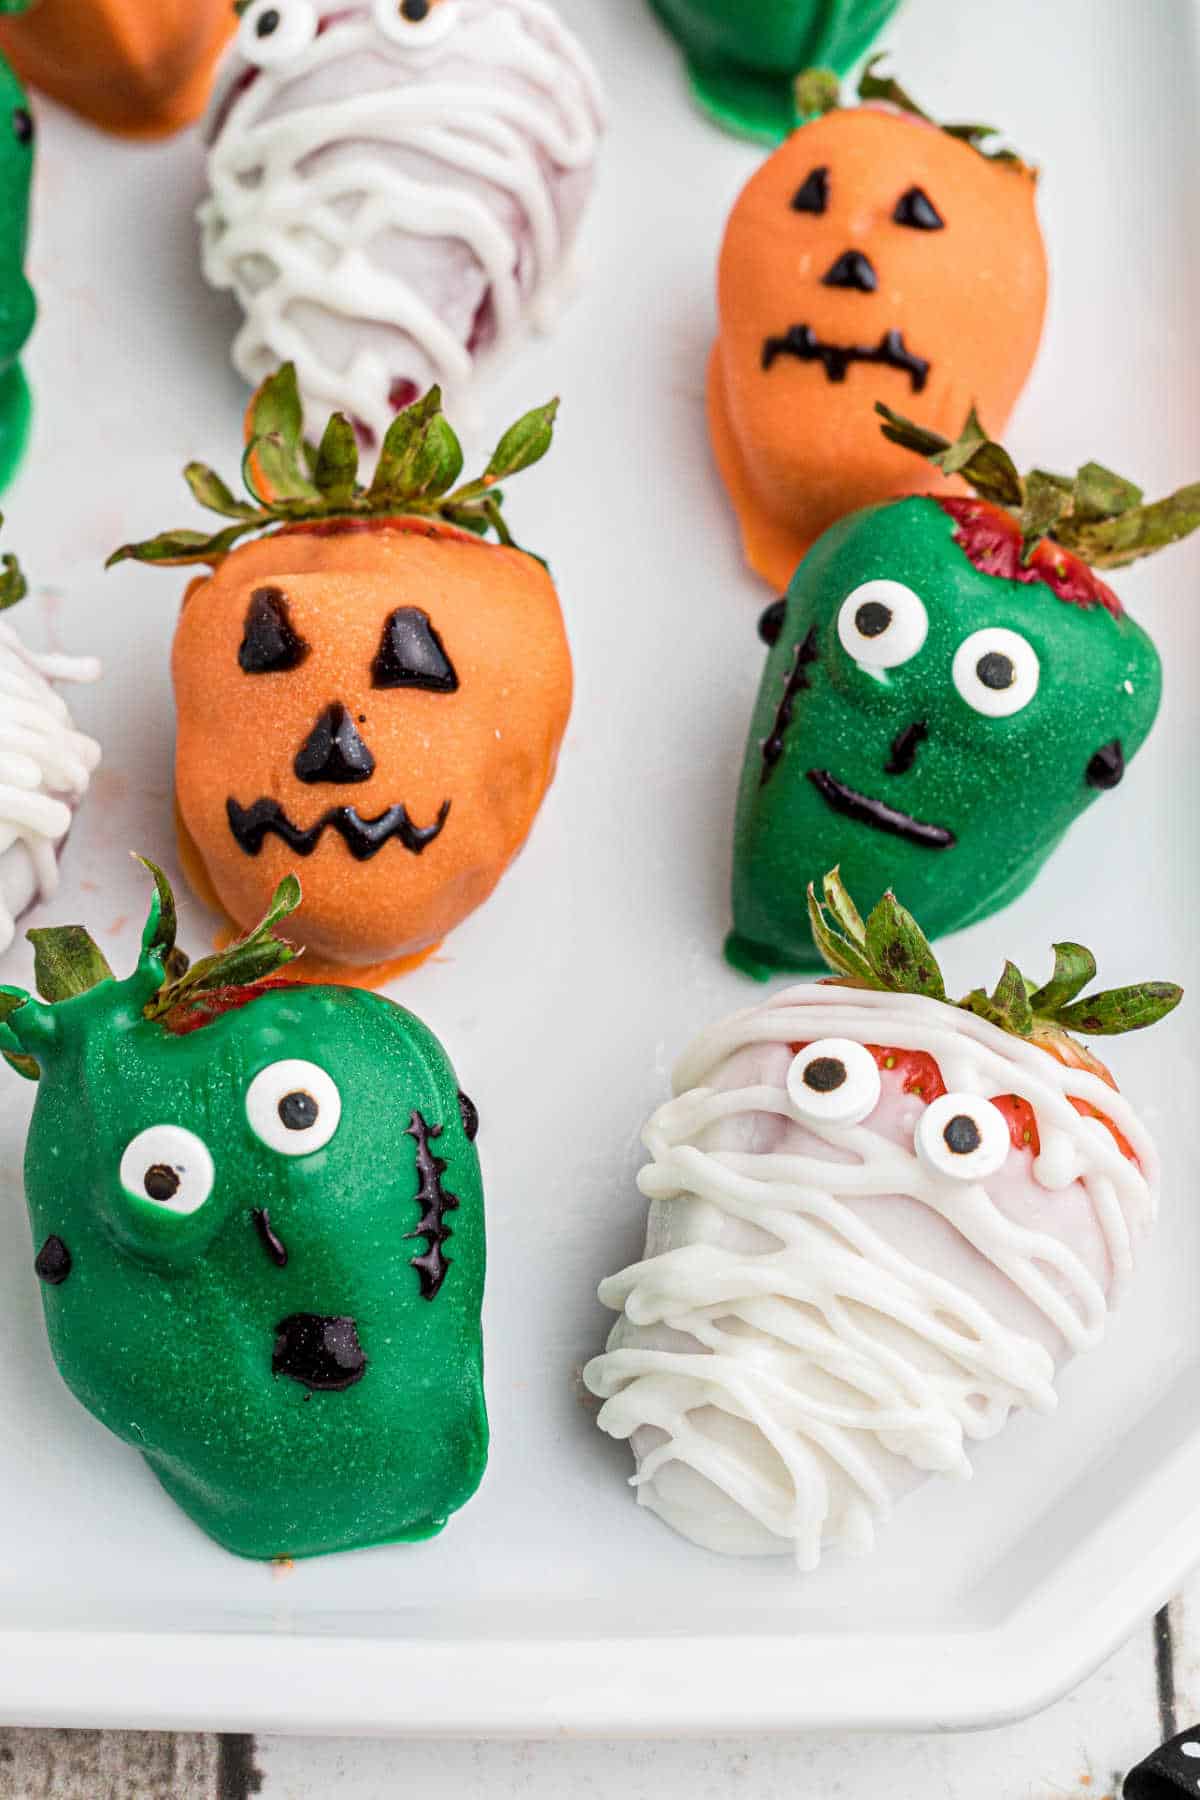 Close up of some Halloween chocolate strawberries - with a mummy, frankenstein and a jackolantern.